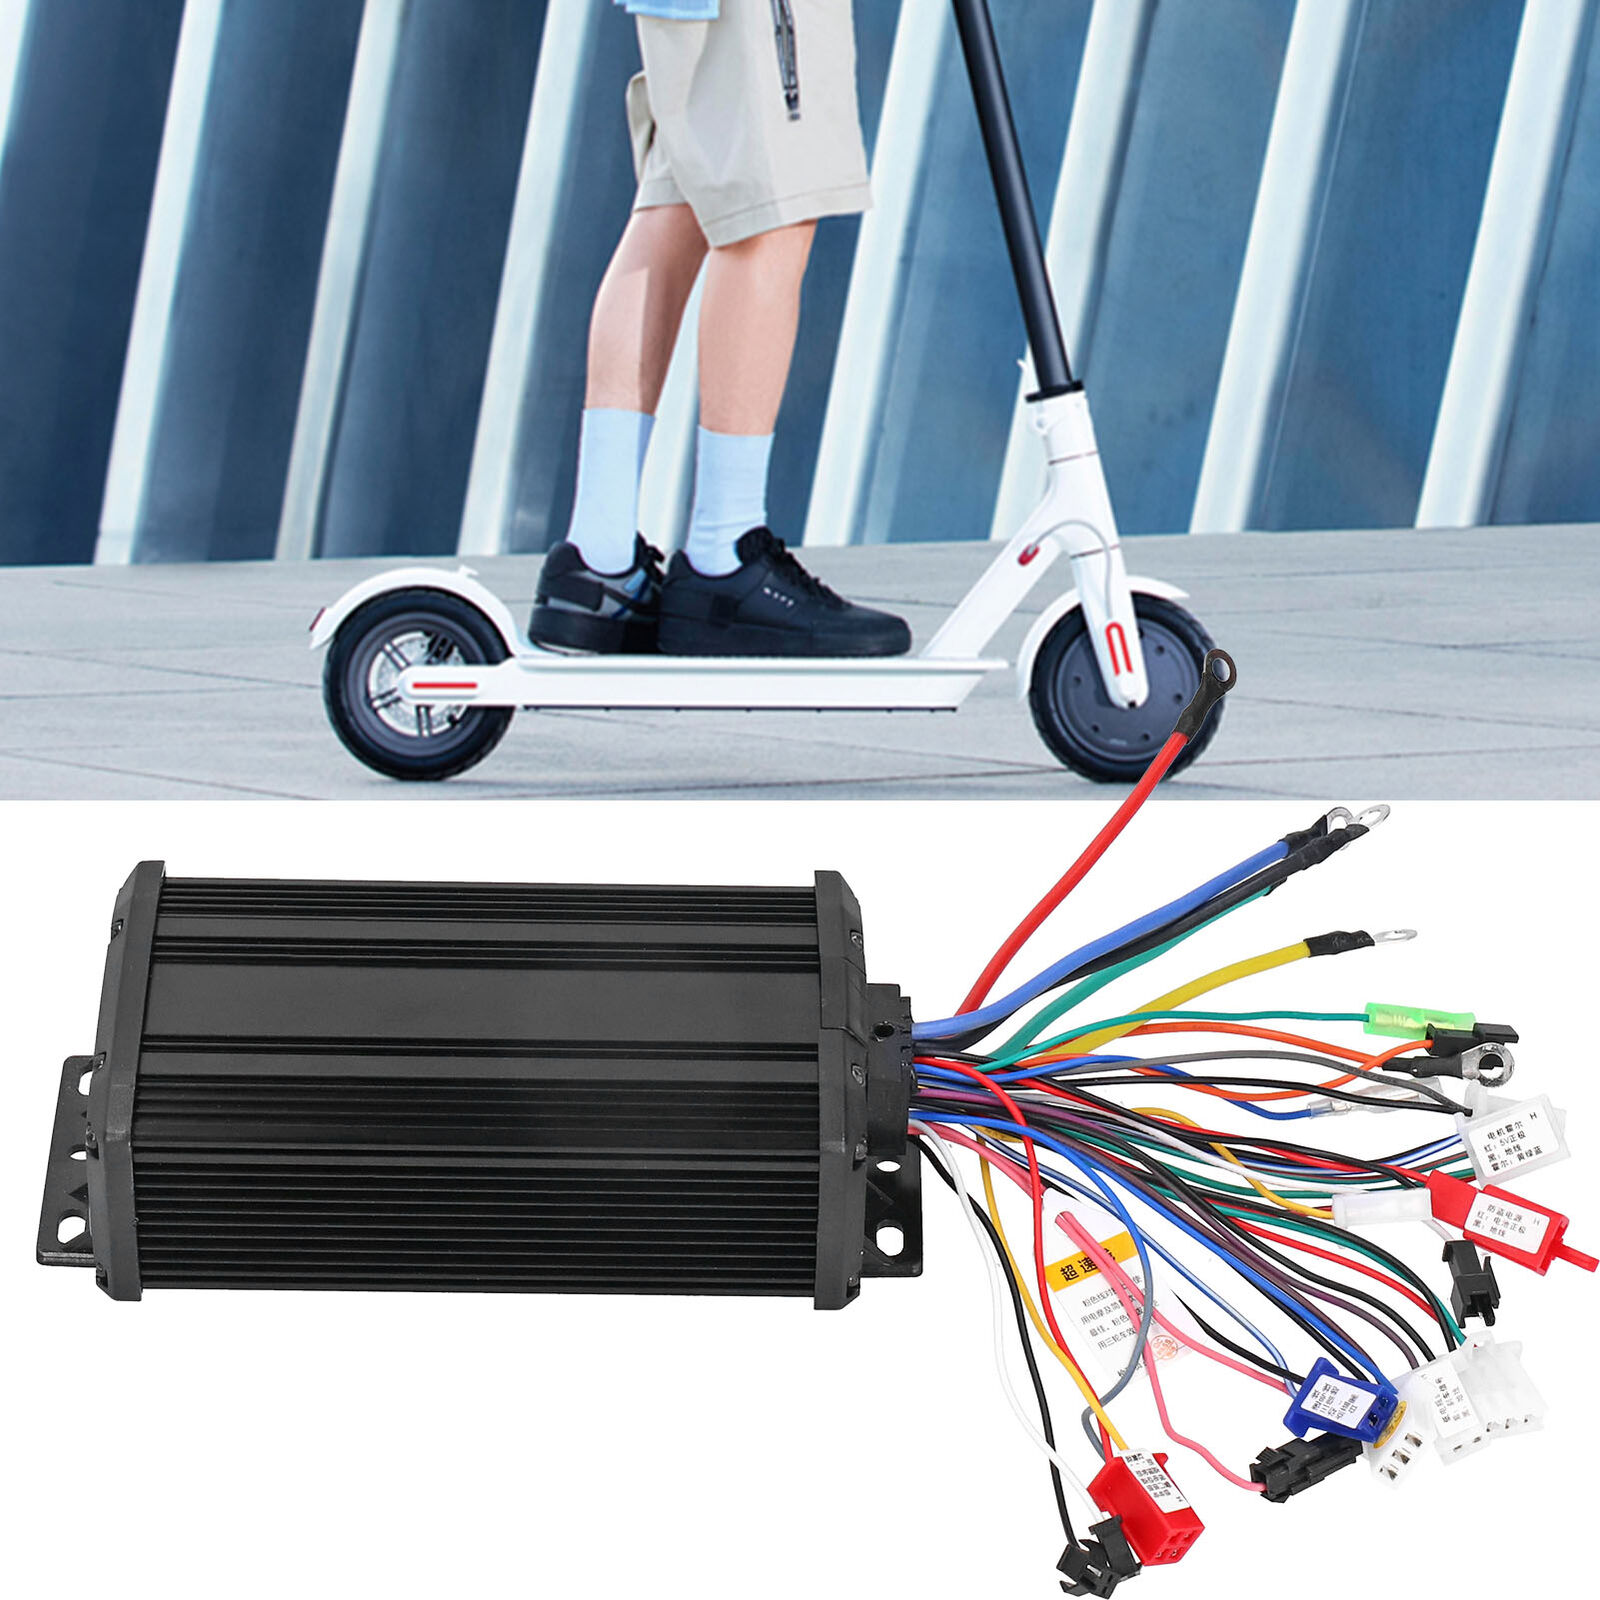 600W Durable Electric Scooter Brushless Motor Controller Accessory | eBay